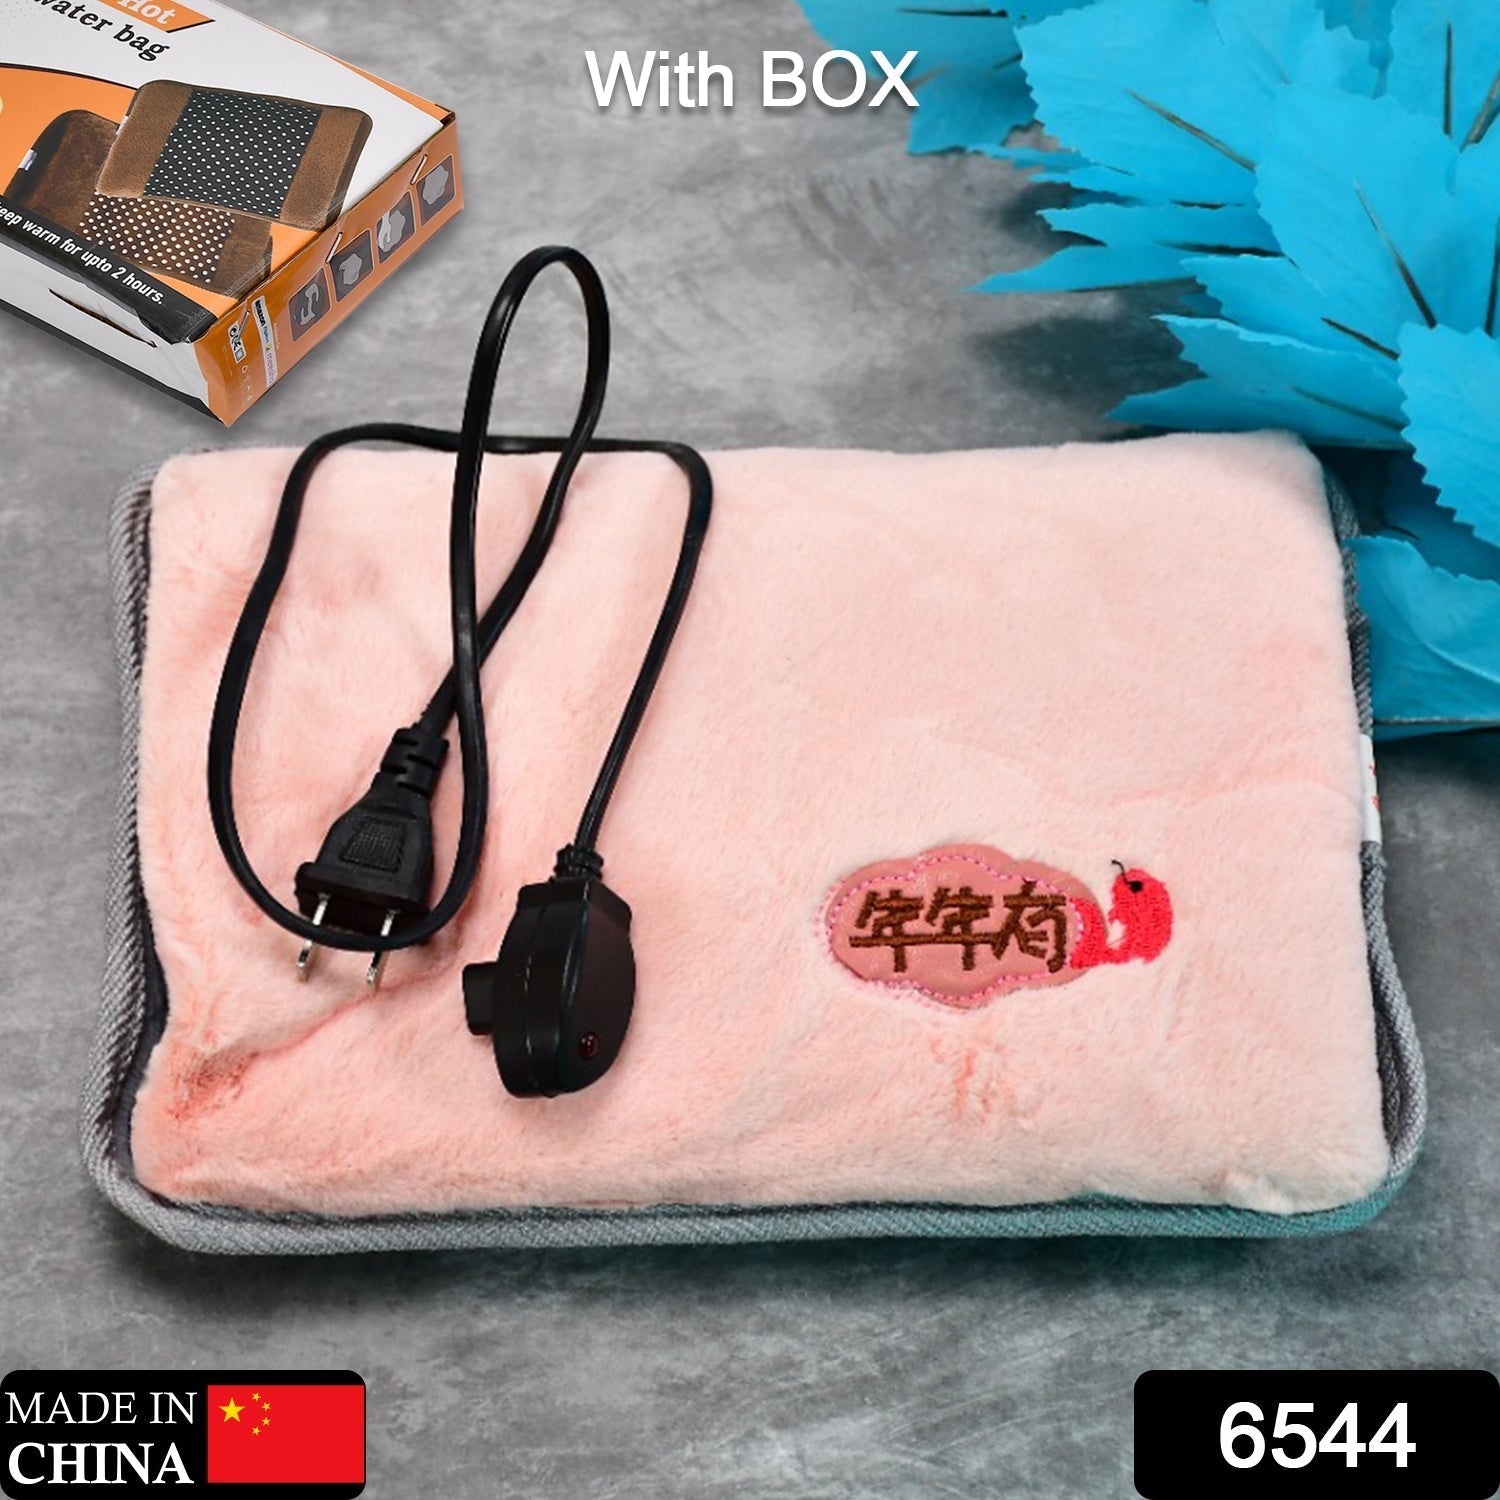 6544 electric heating bag, hot water bag, Heating Pad, Electrical Hot Warm Water Bag, Heat Bag with Gel for Back pain , Hand , muscle Pain relief , Stress relief with Box 